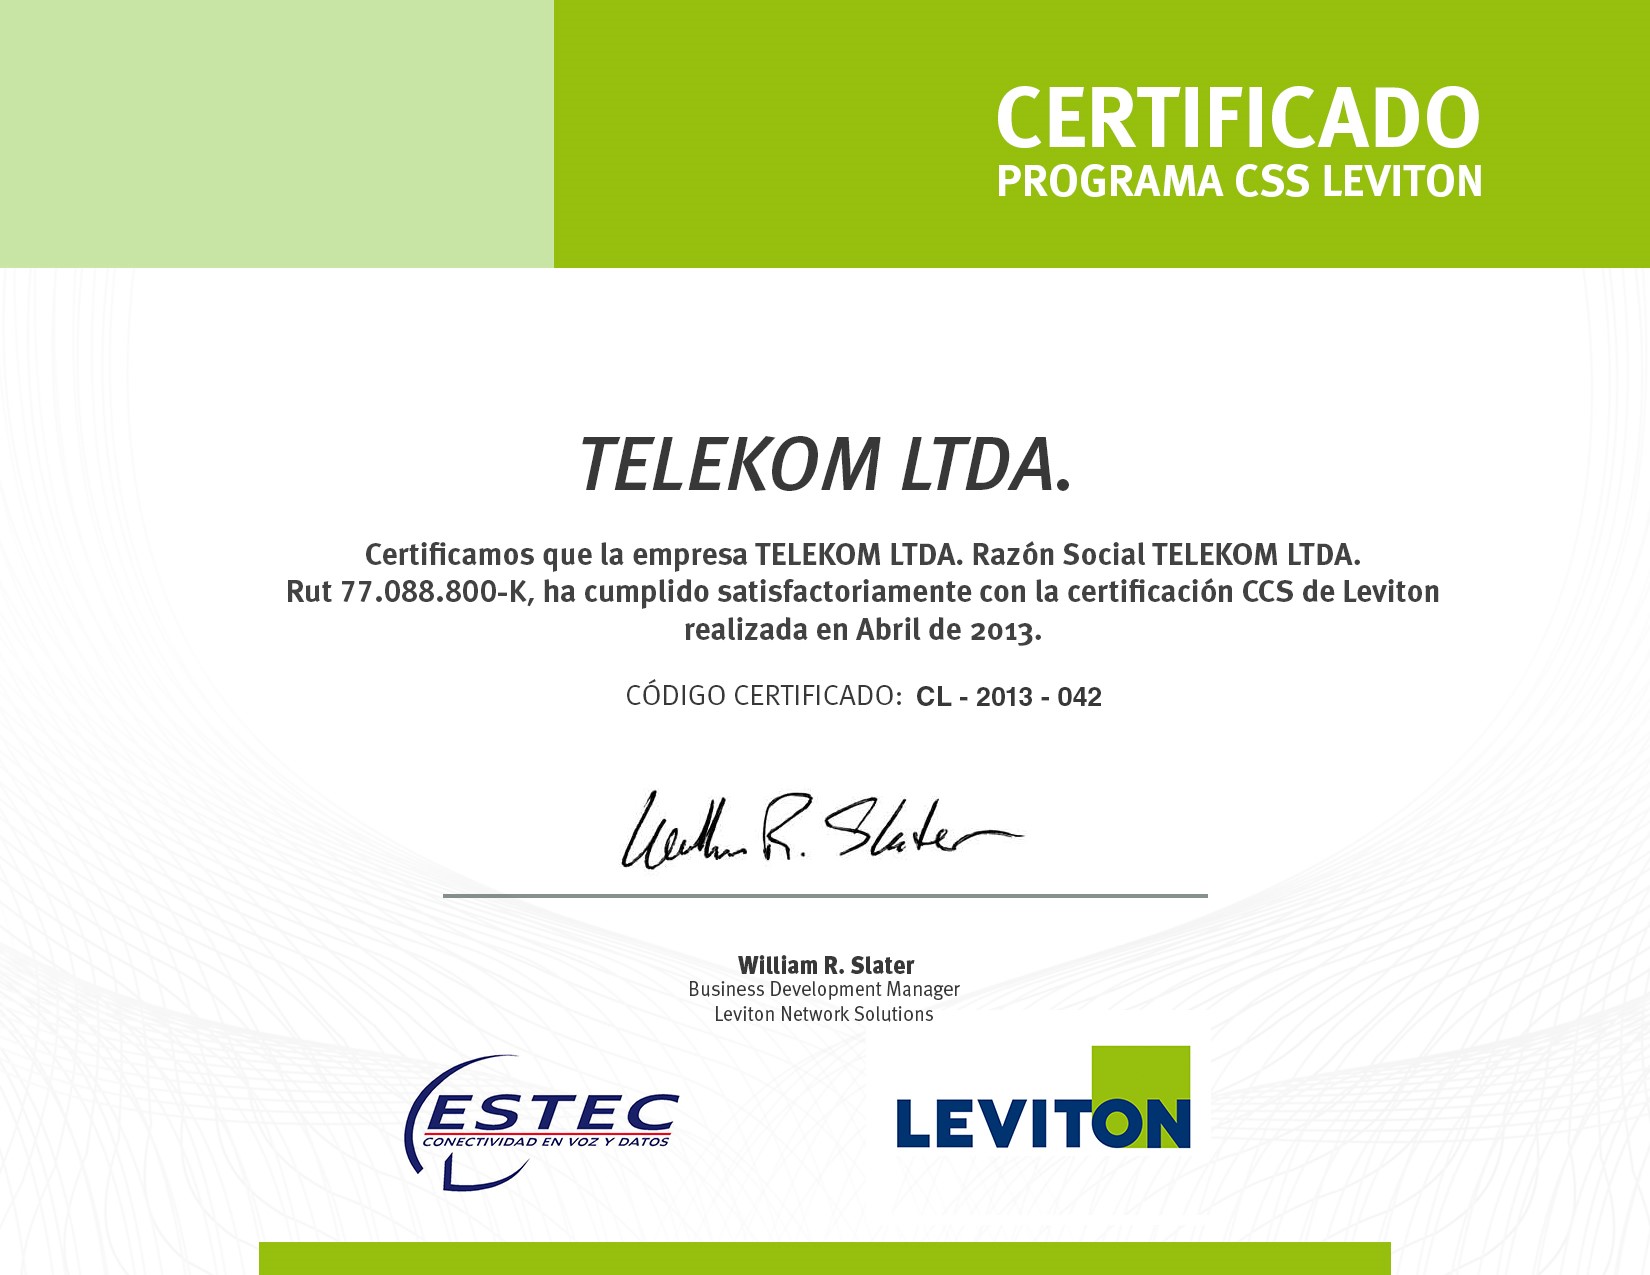 LEVITON NETWORK SOLUTIONS